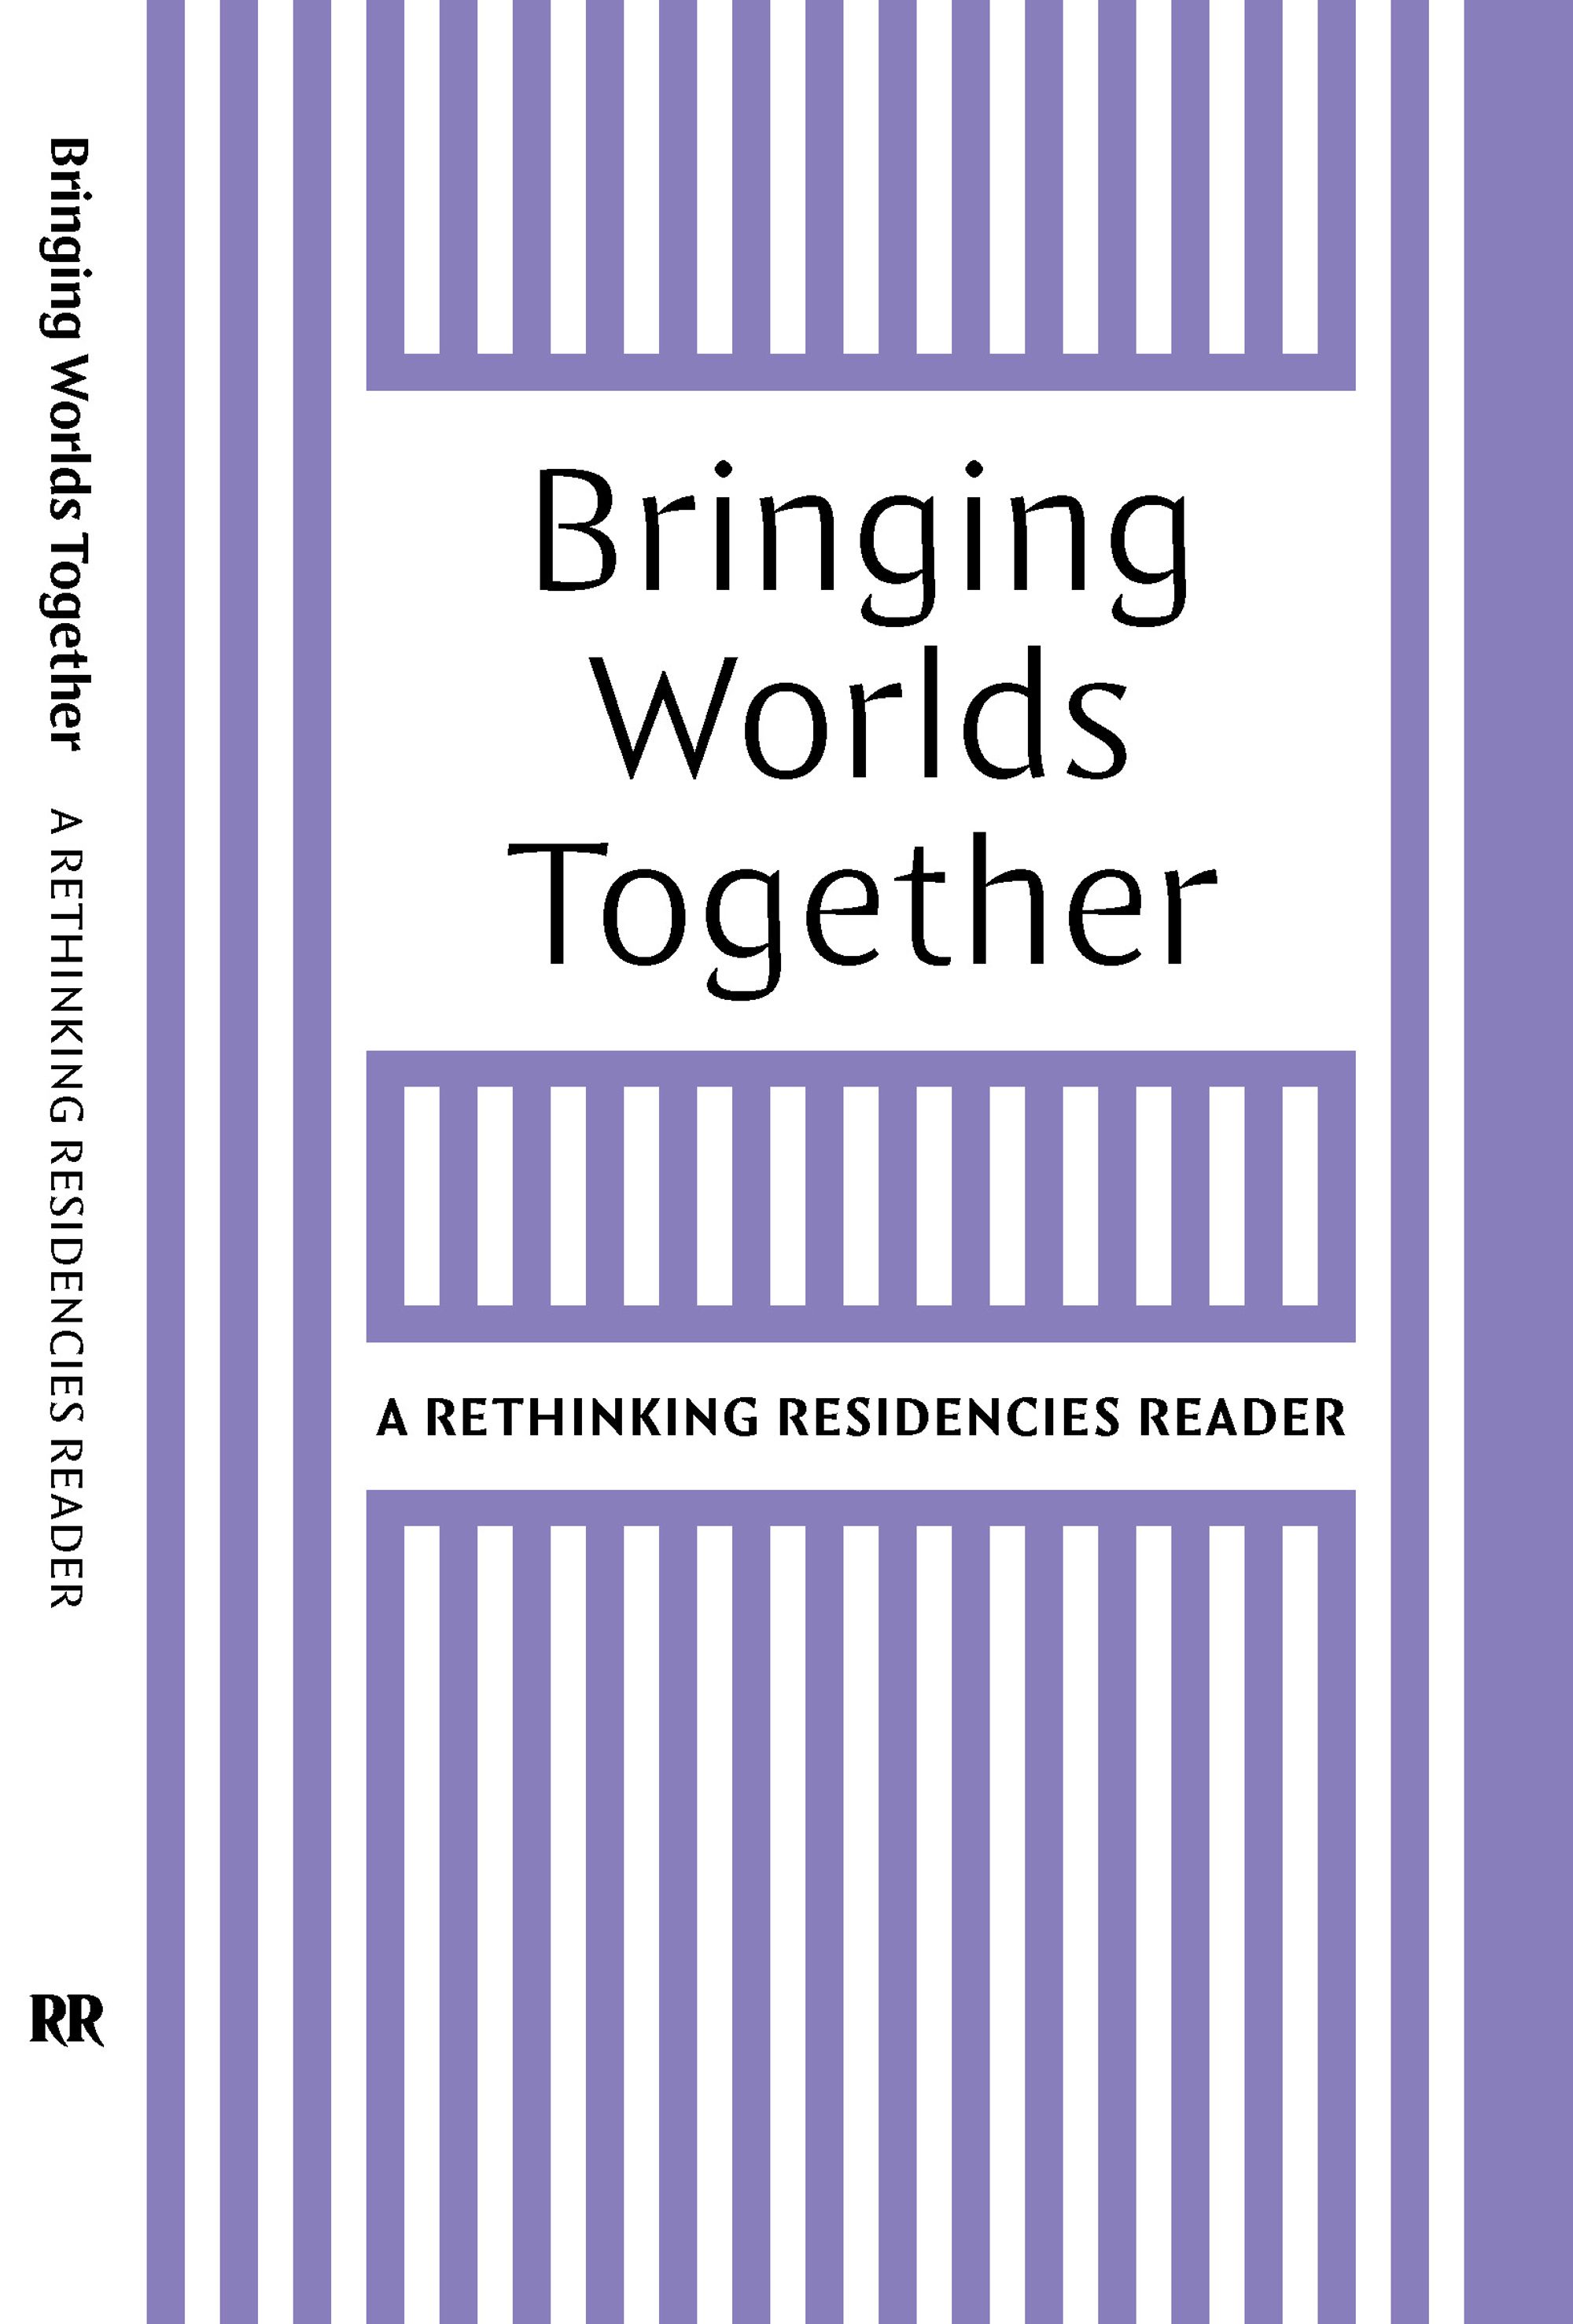 Bringing Worlds Together: A Rethinking Residencies Reader Launch